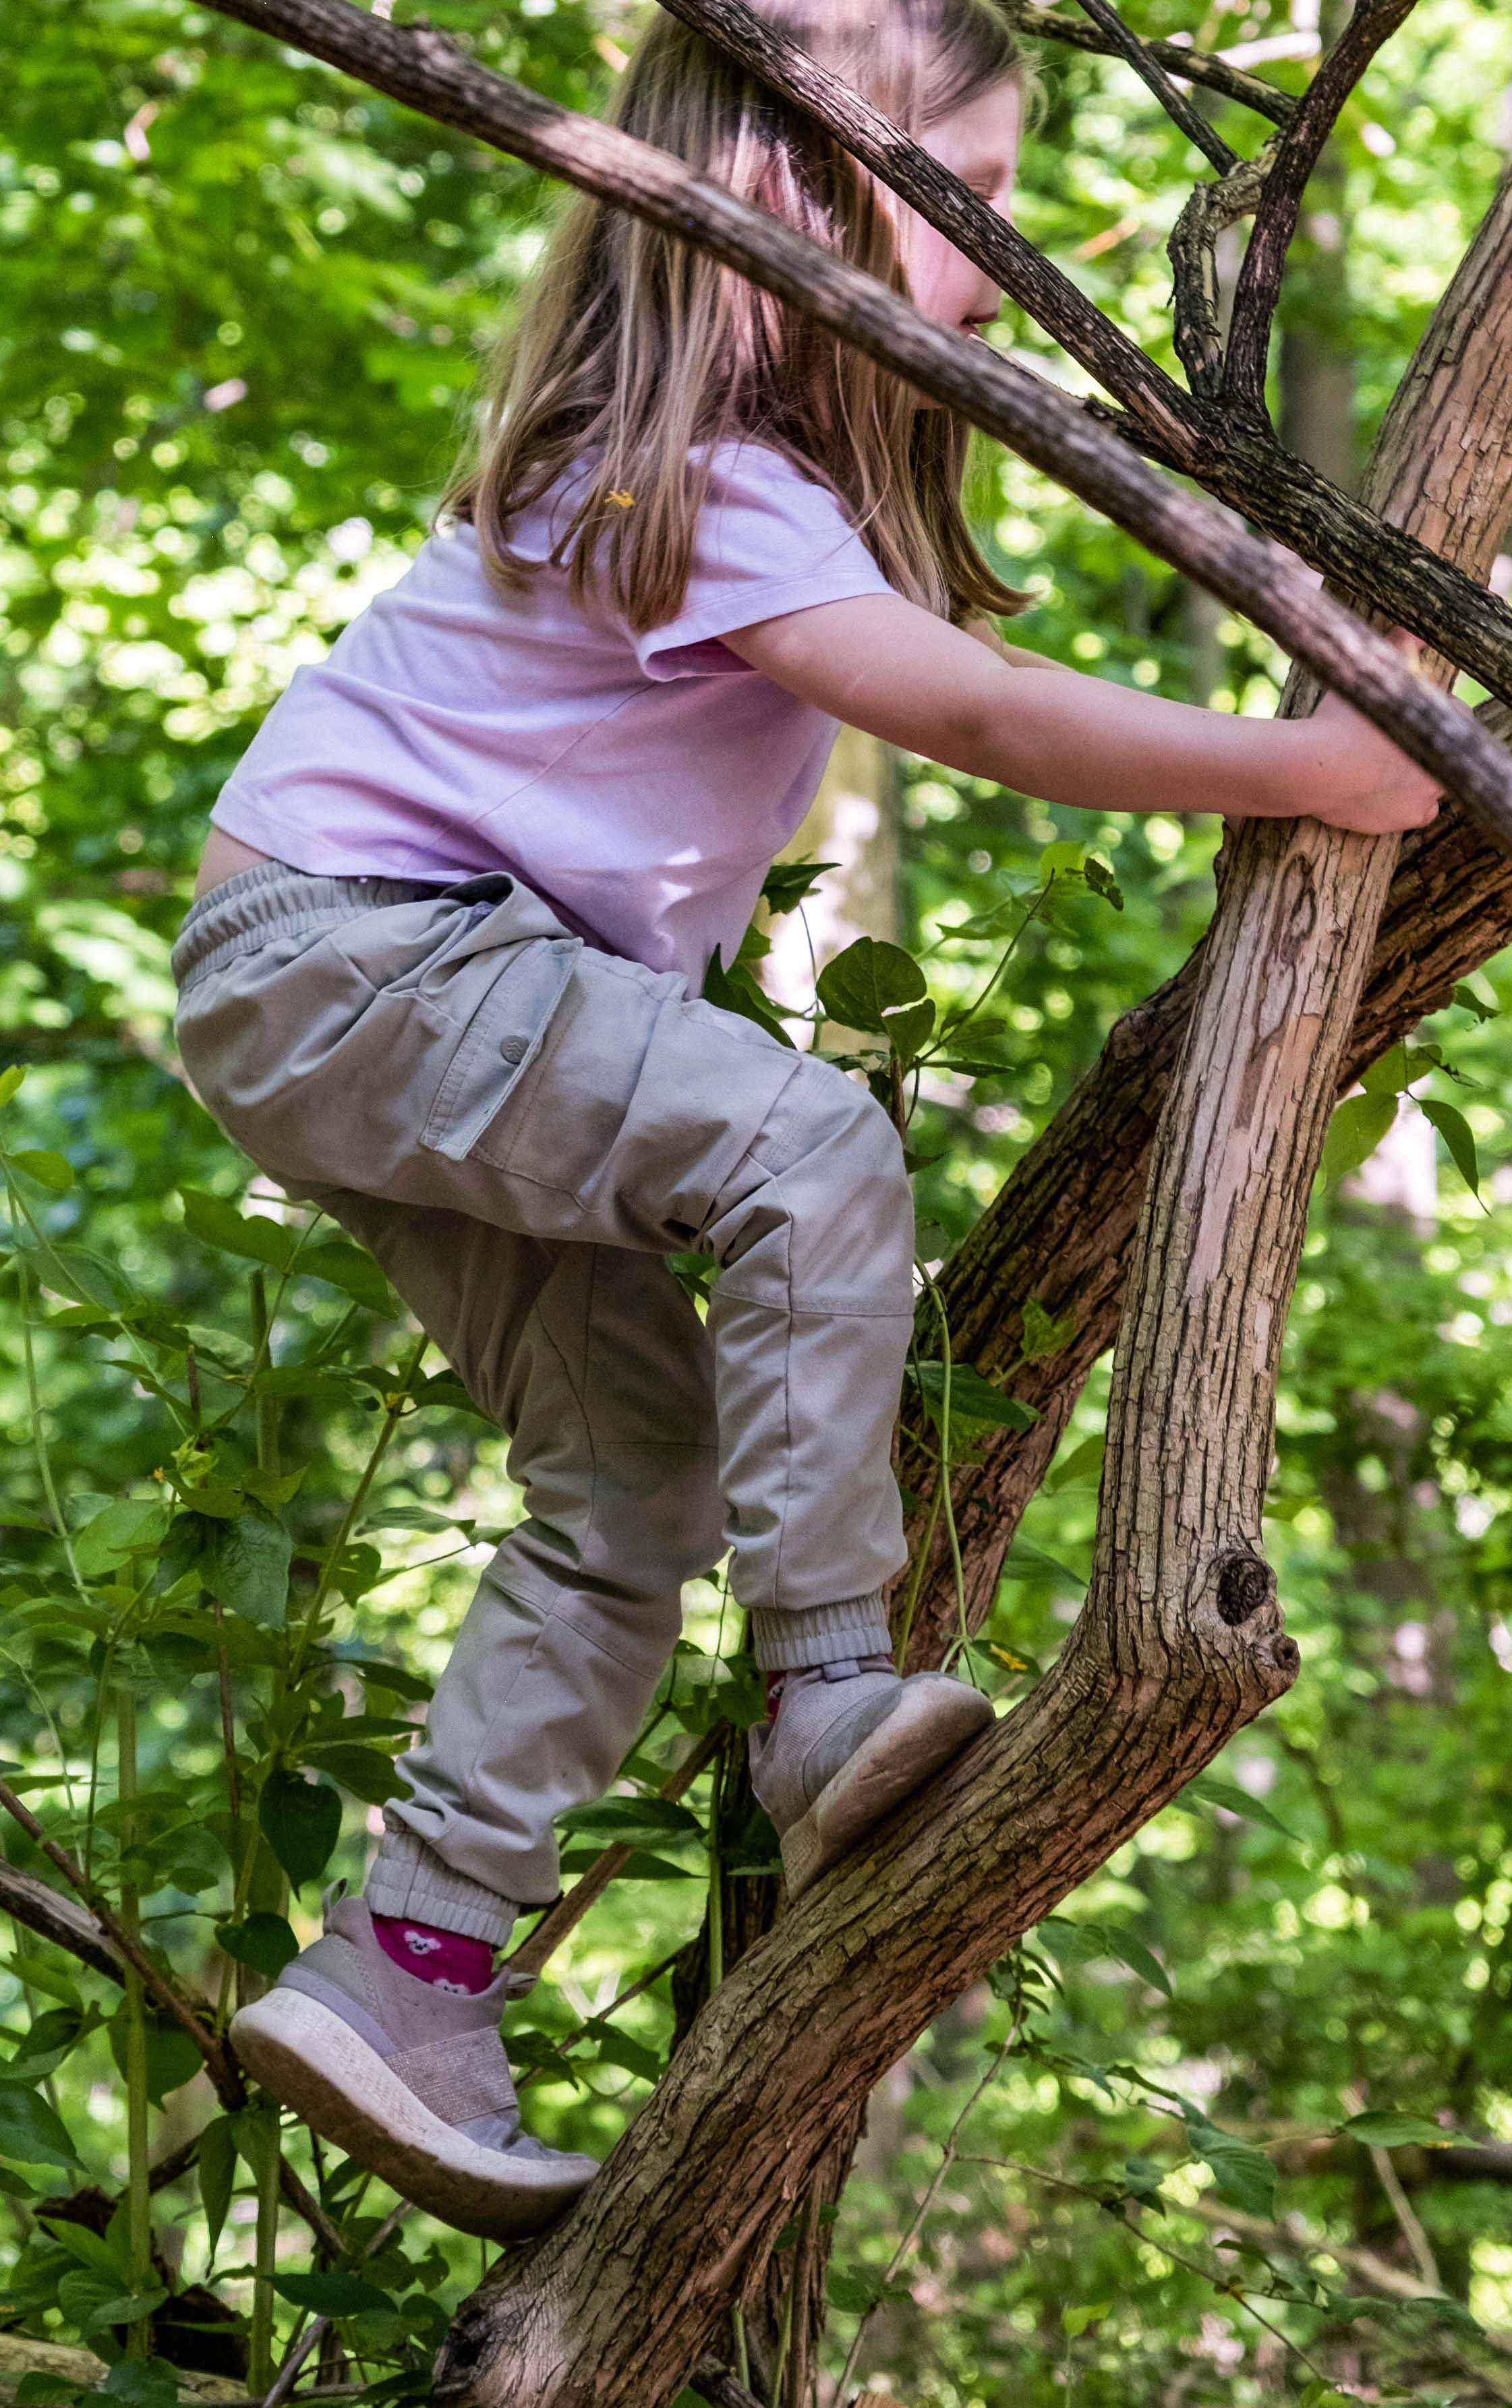  In the forest school and Reggio Emilia models, kids build physical and social skills, and readily grasp educational concepts because they learn with hands, bodies, and minds.  